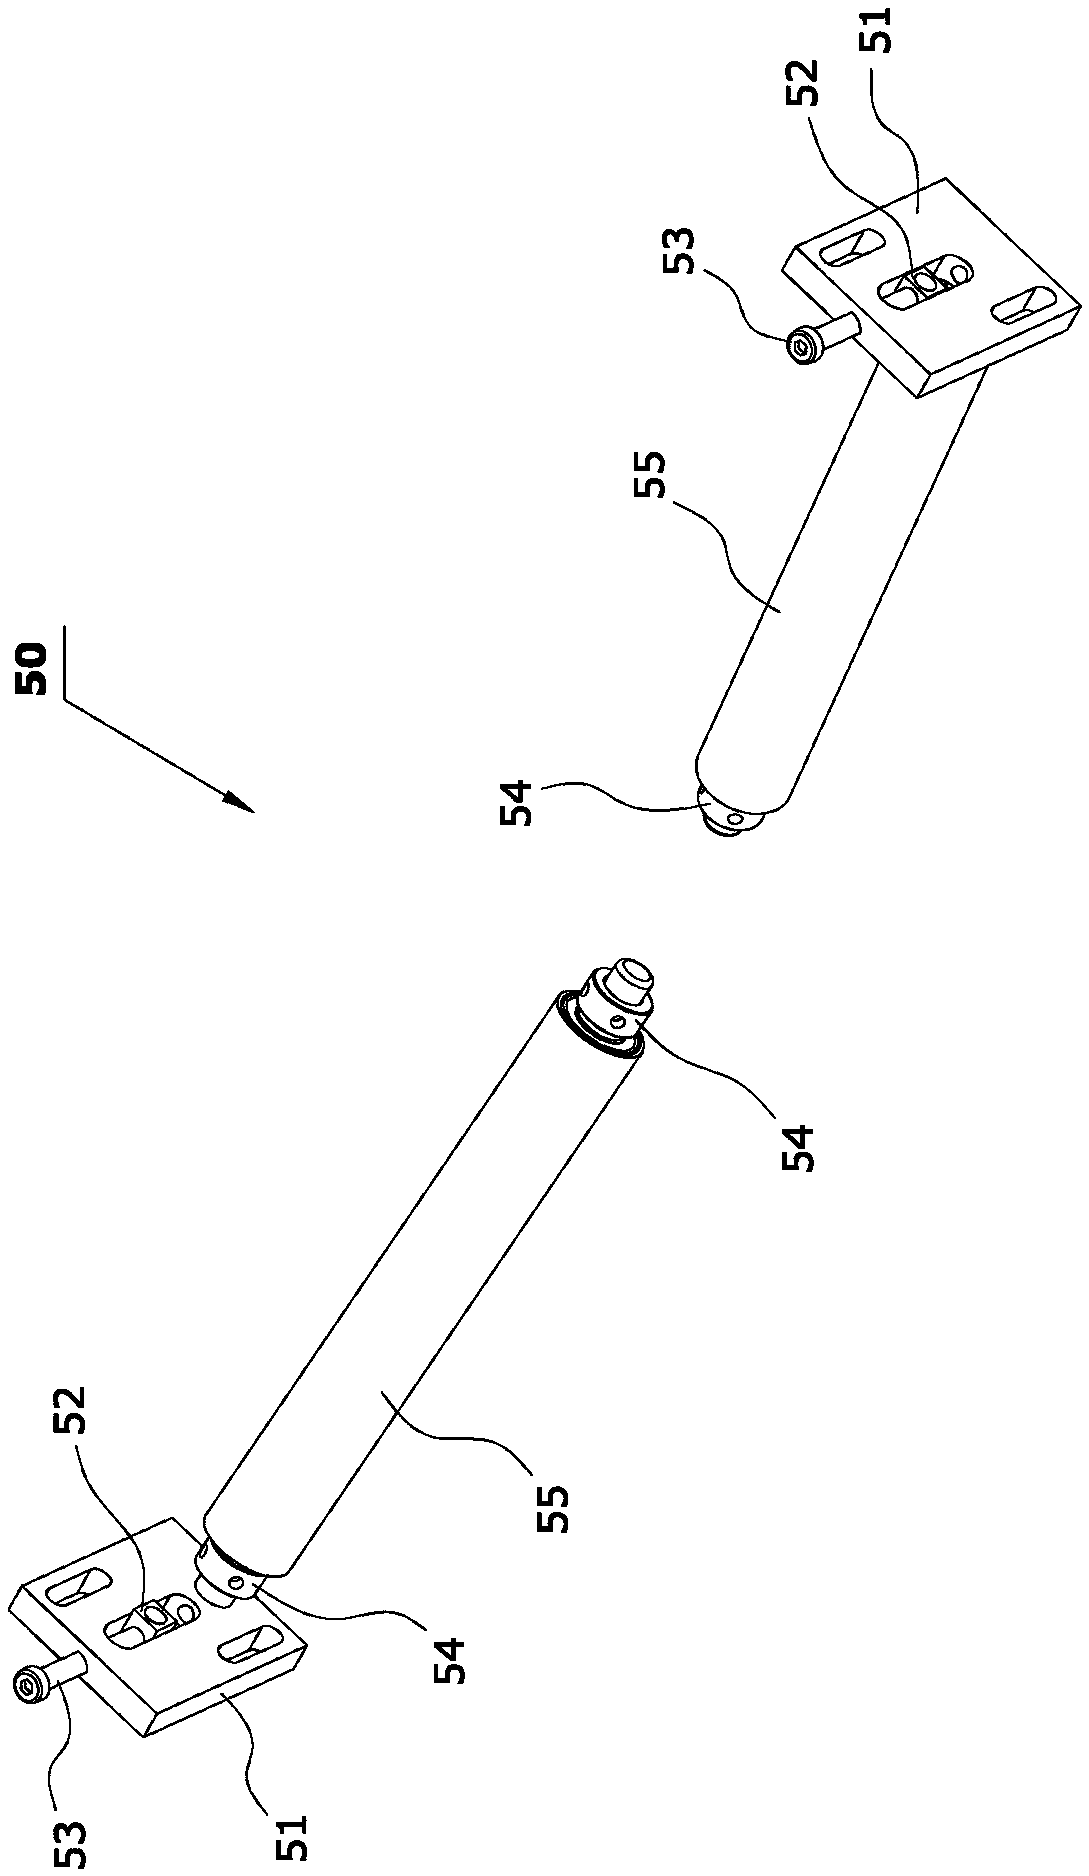 Device for automatically fitting liners and treads of tires of electric vehicles or motorcycles